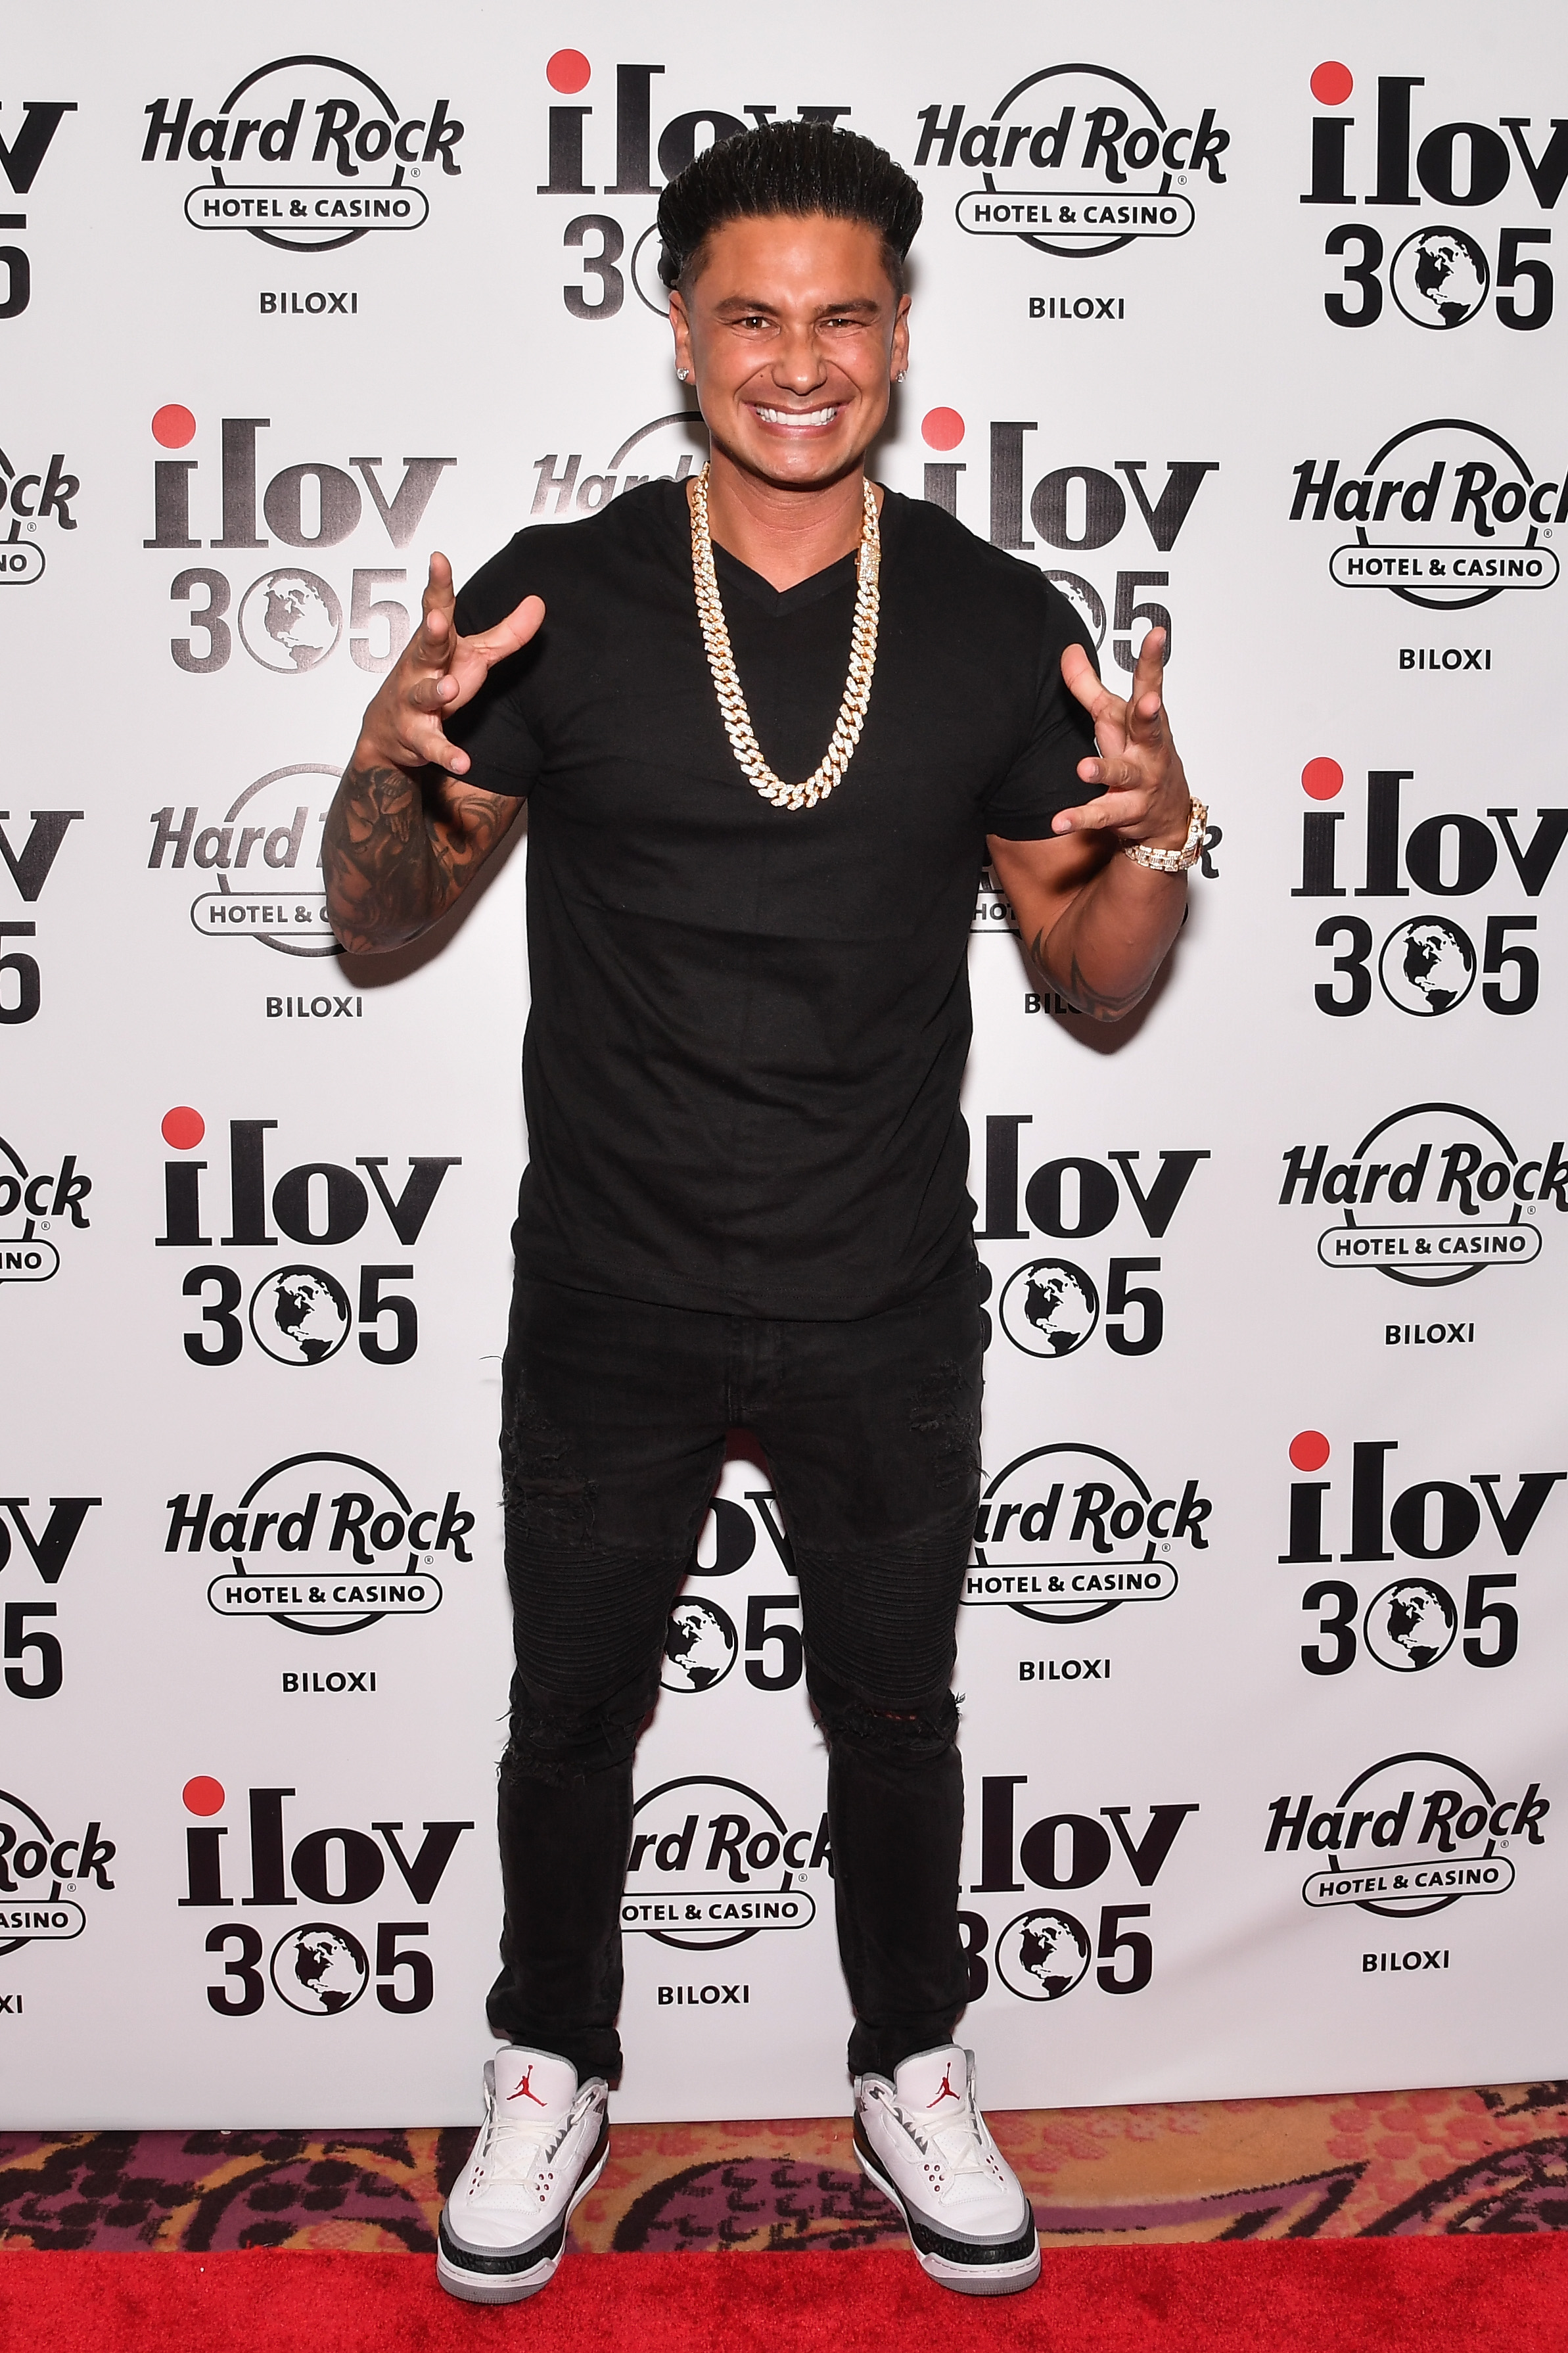 dating show cu pauly d)